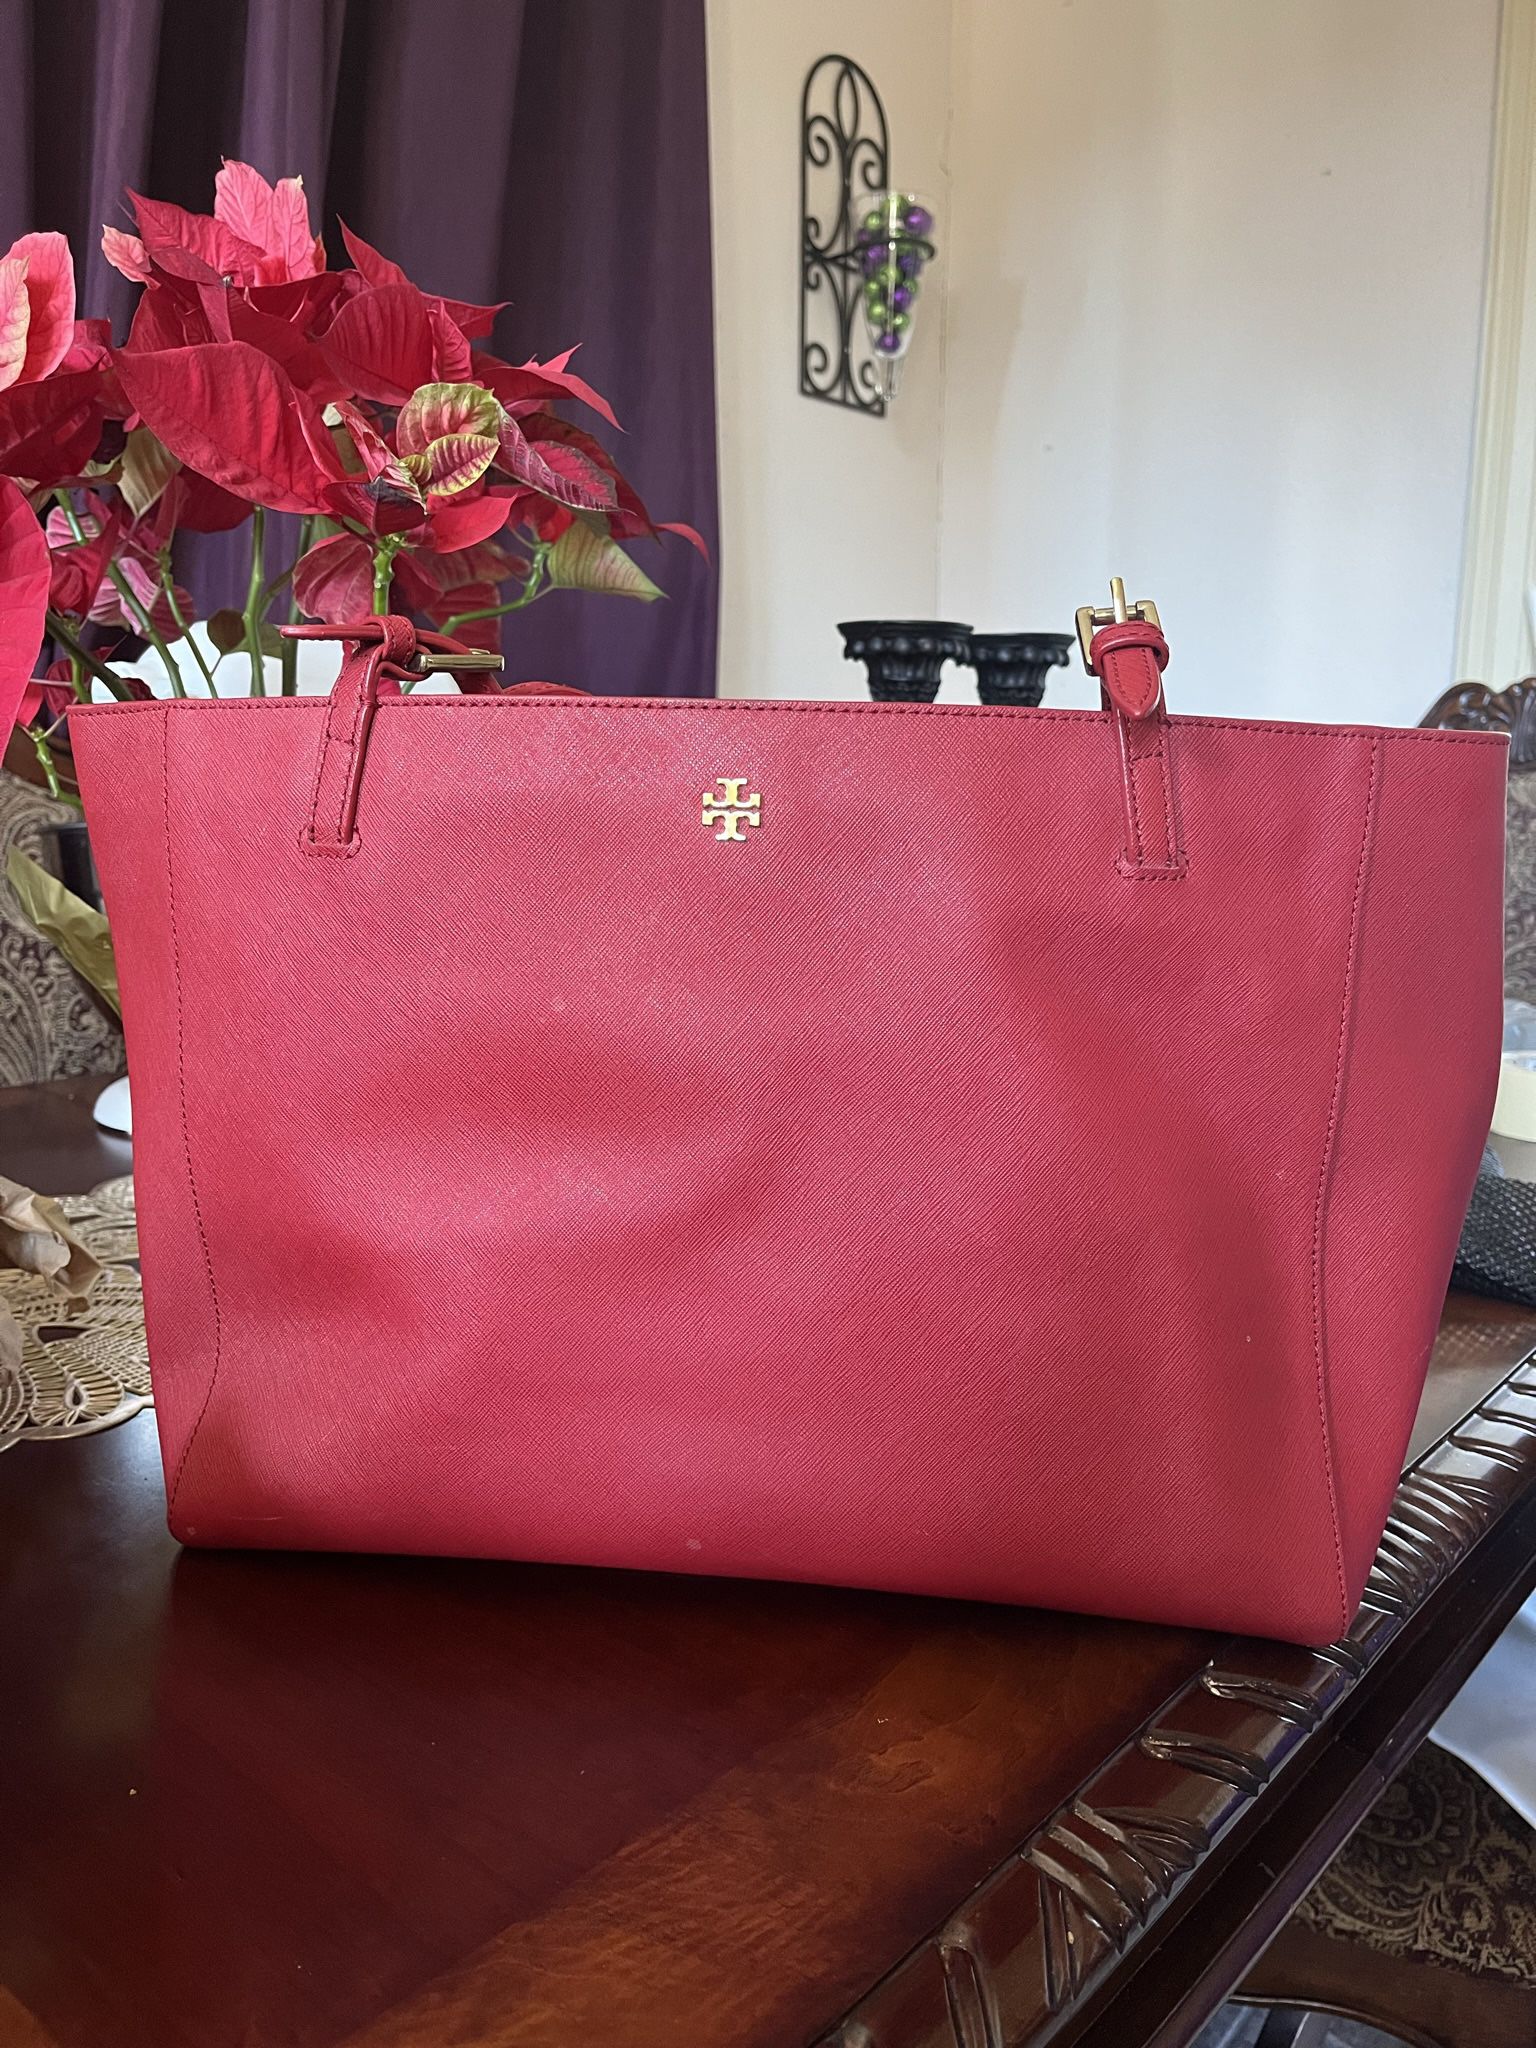 Tory Burch Large York Tote for Sale in San Antonio, TX - OfferUp